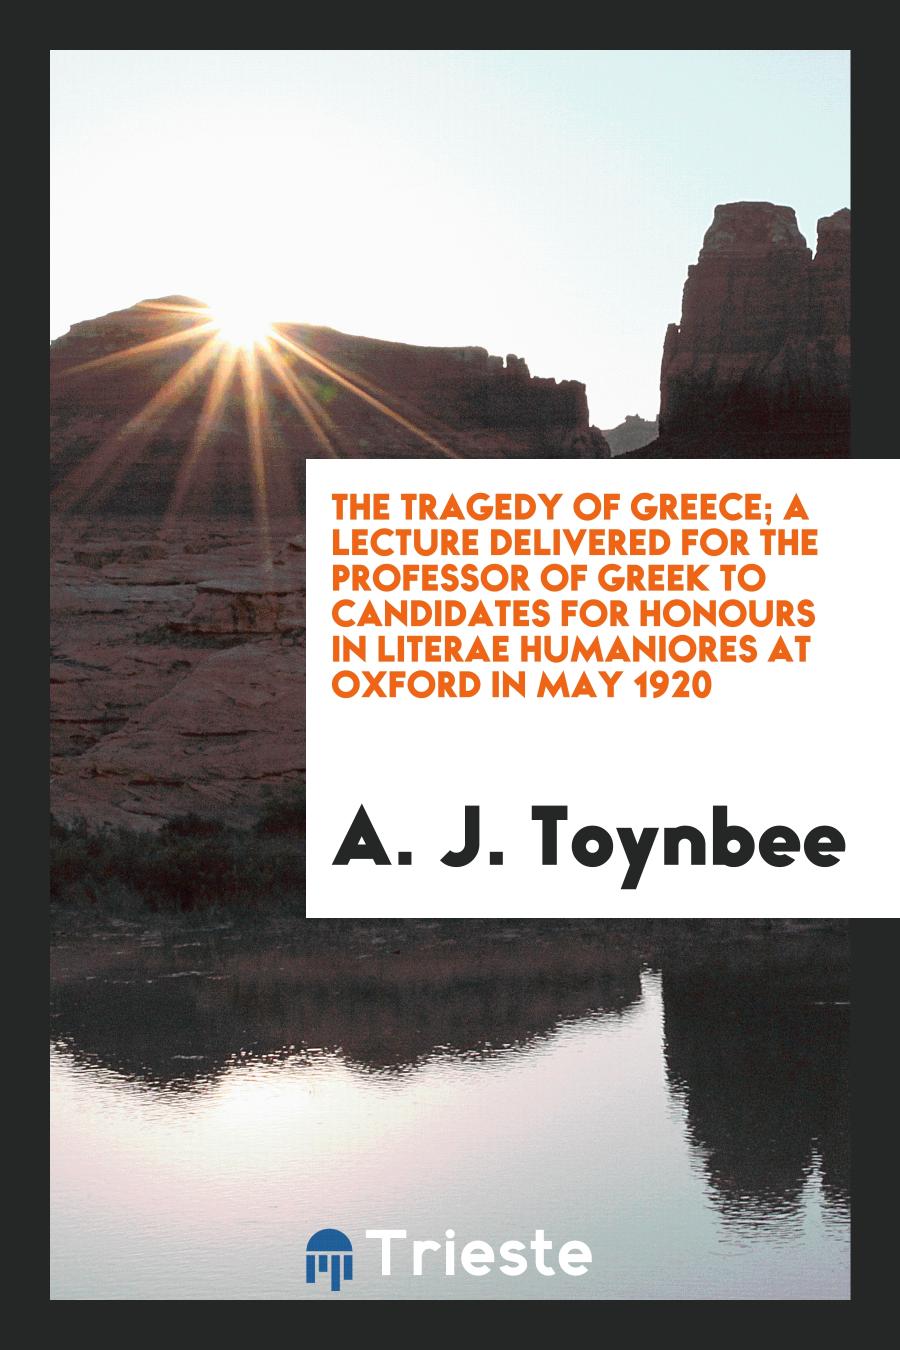 The tragedy of Greece; a lecture delivered for the professor of Greek to candidates for honours in literae humaniores at Oxford in May 1920